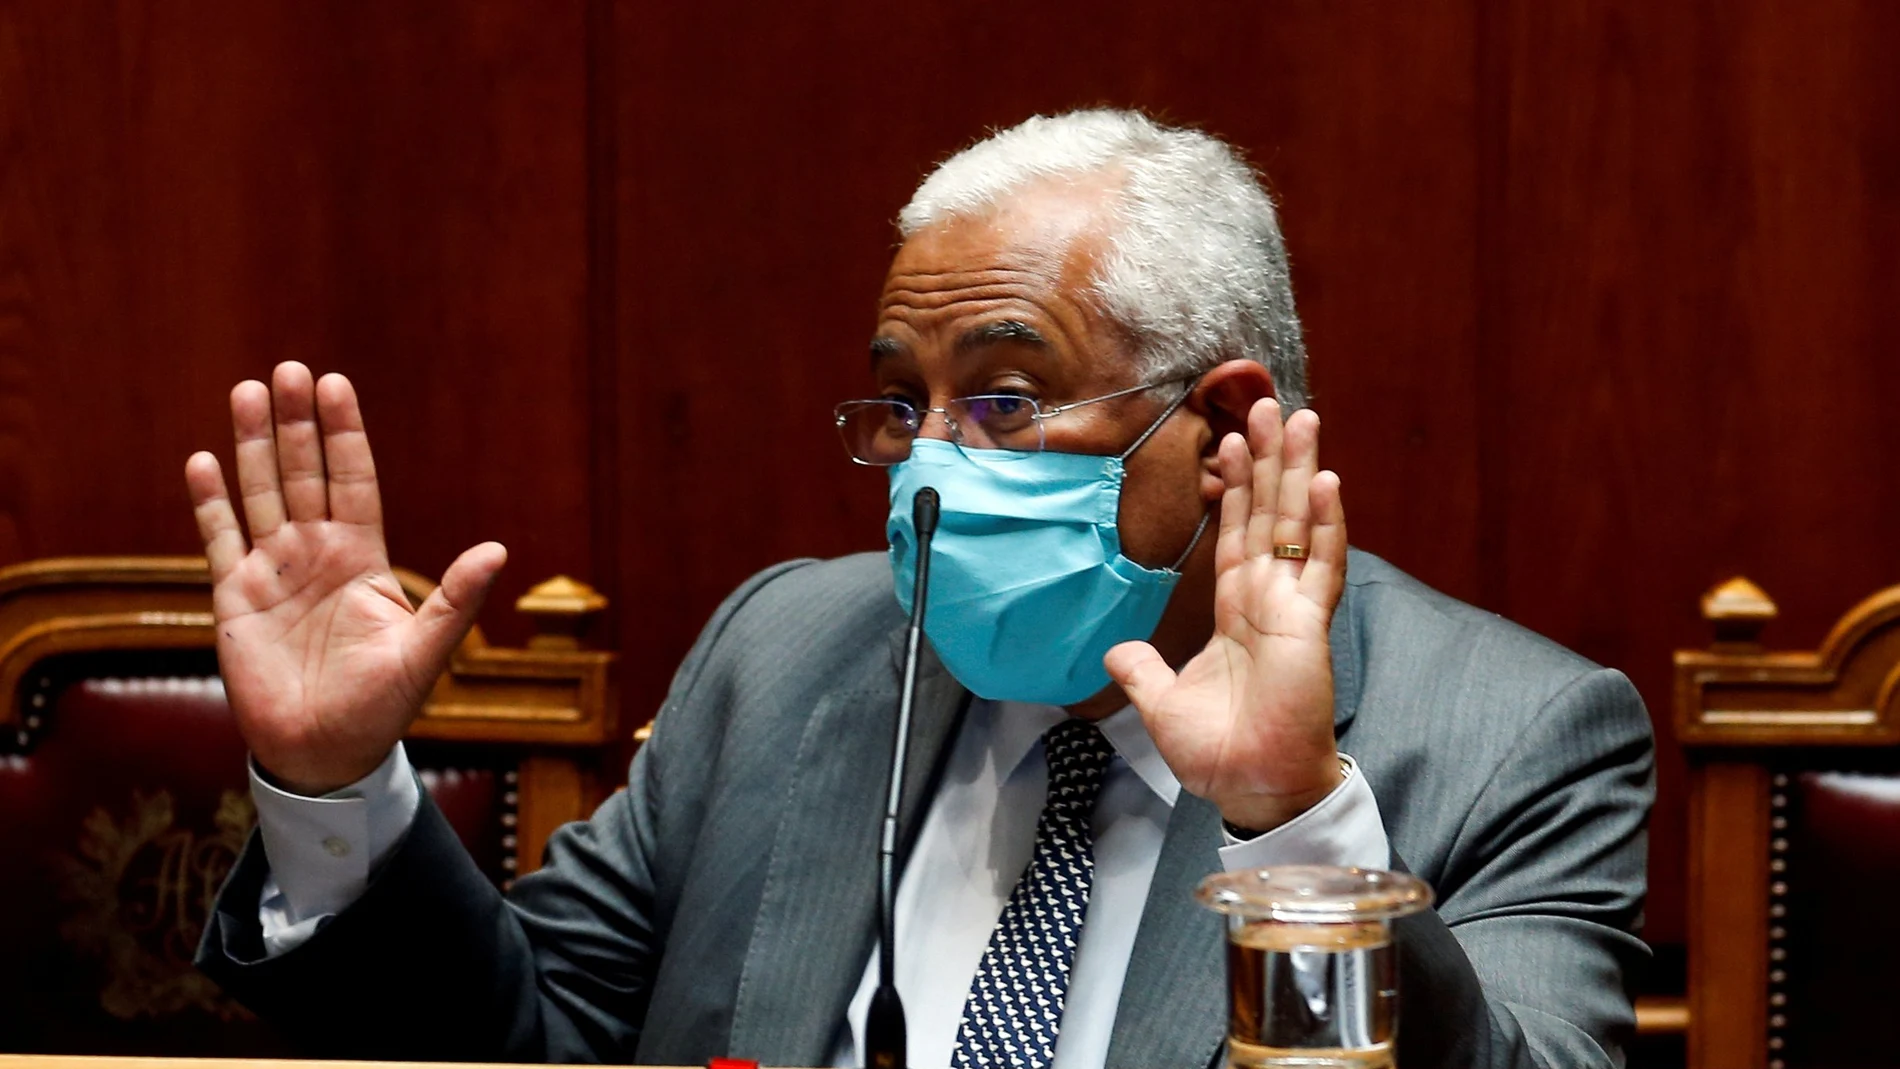 FILE PHOTO: Portugal?s Prime Minister Antonio Costa attends a biweekly debate at the parliament, amid the coronavirus disease (COVID-19) outbreak, in Lisbon